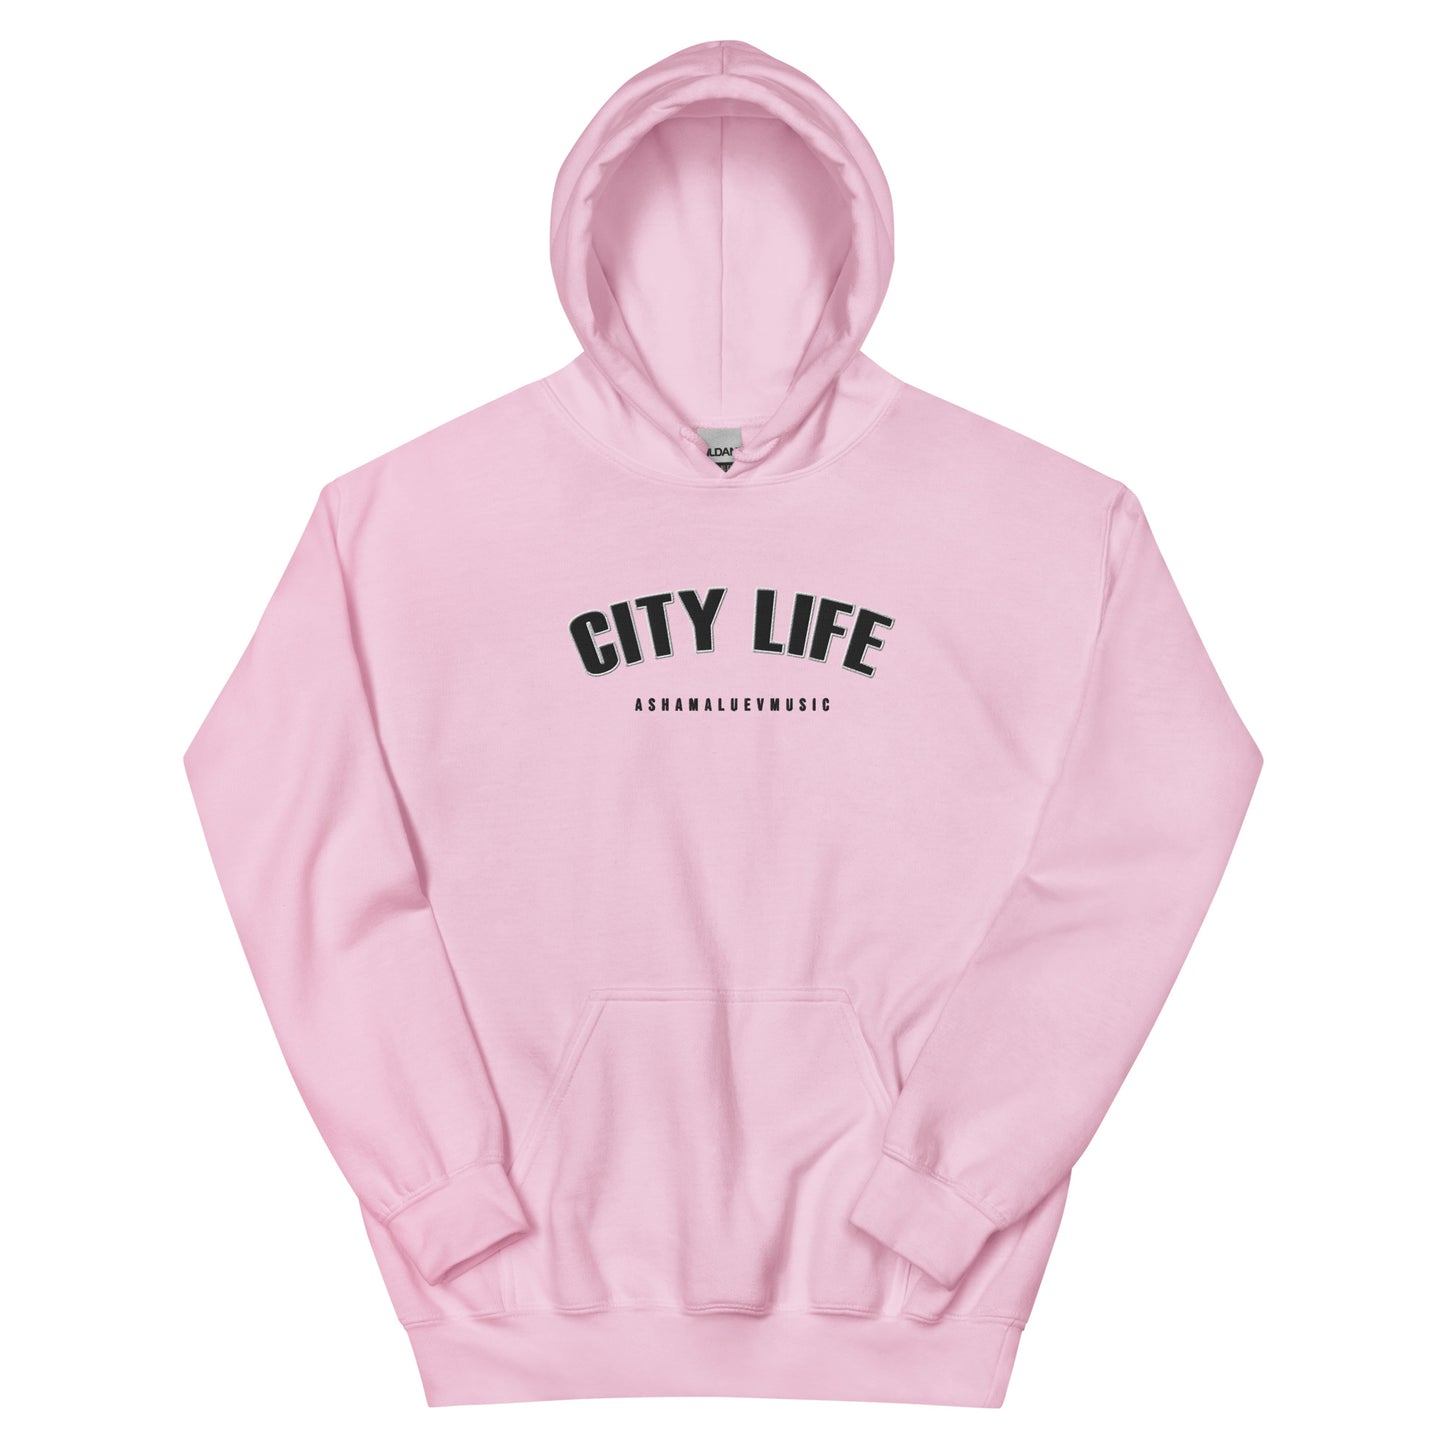 Hoodie "City Life" (Embroidery)